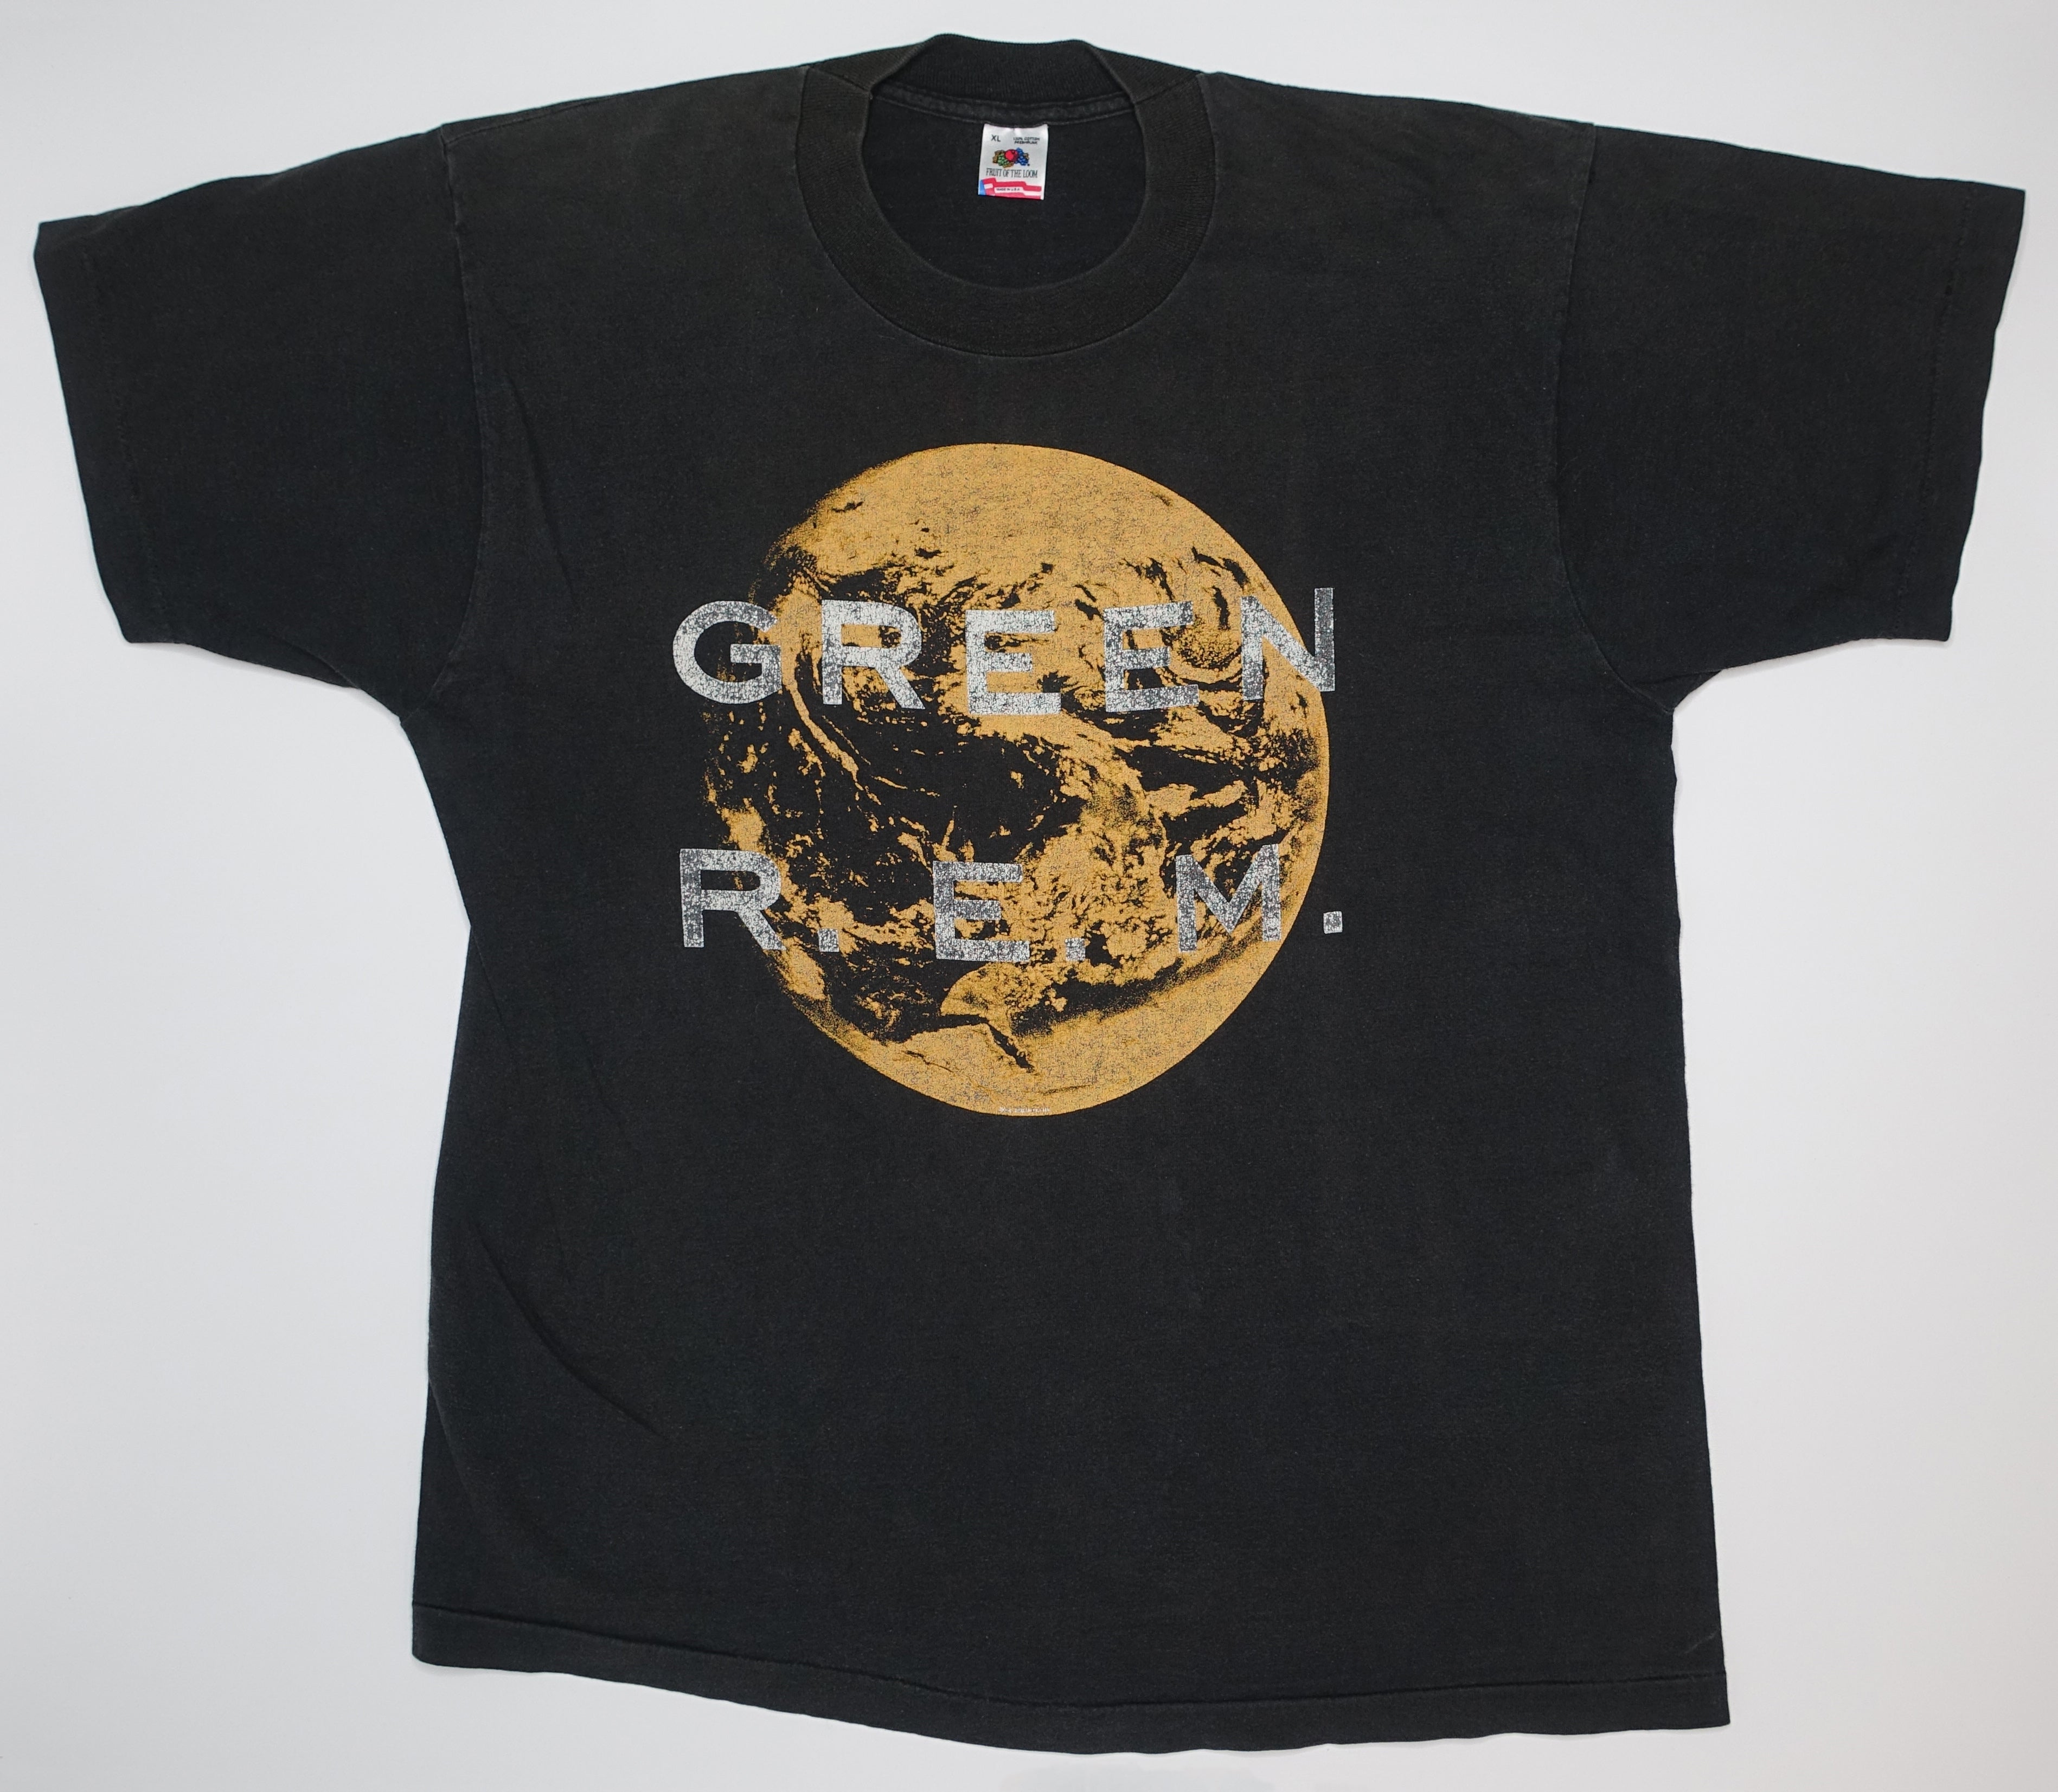 R.E.M. – You Are The Everything W/ Circle Green 1988 Tour Shirt Size XL